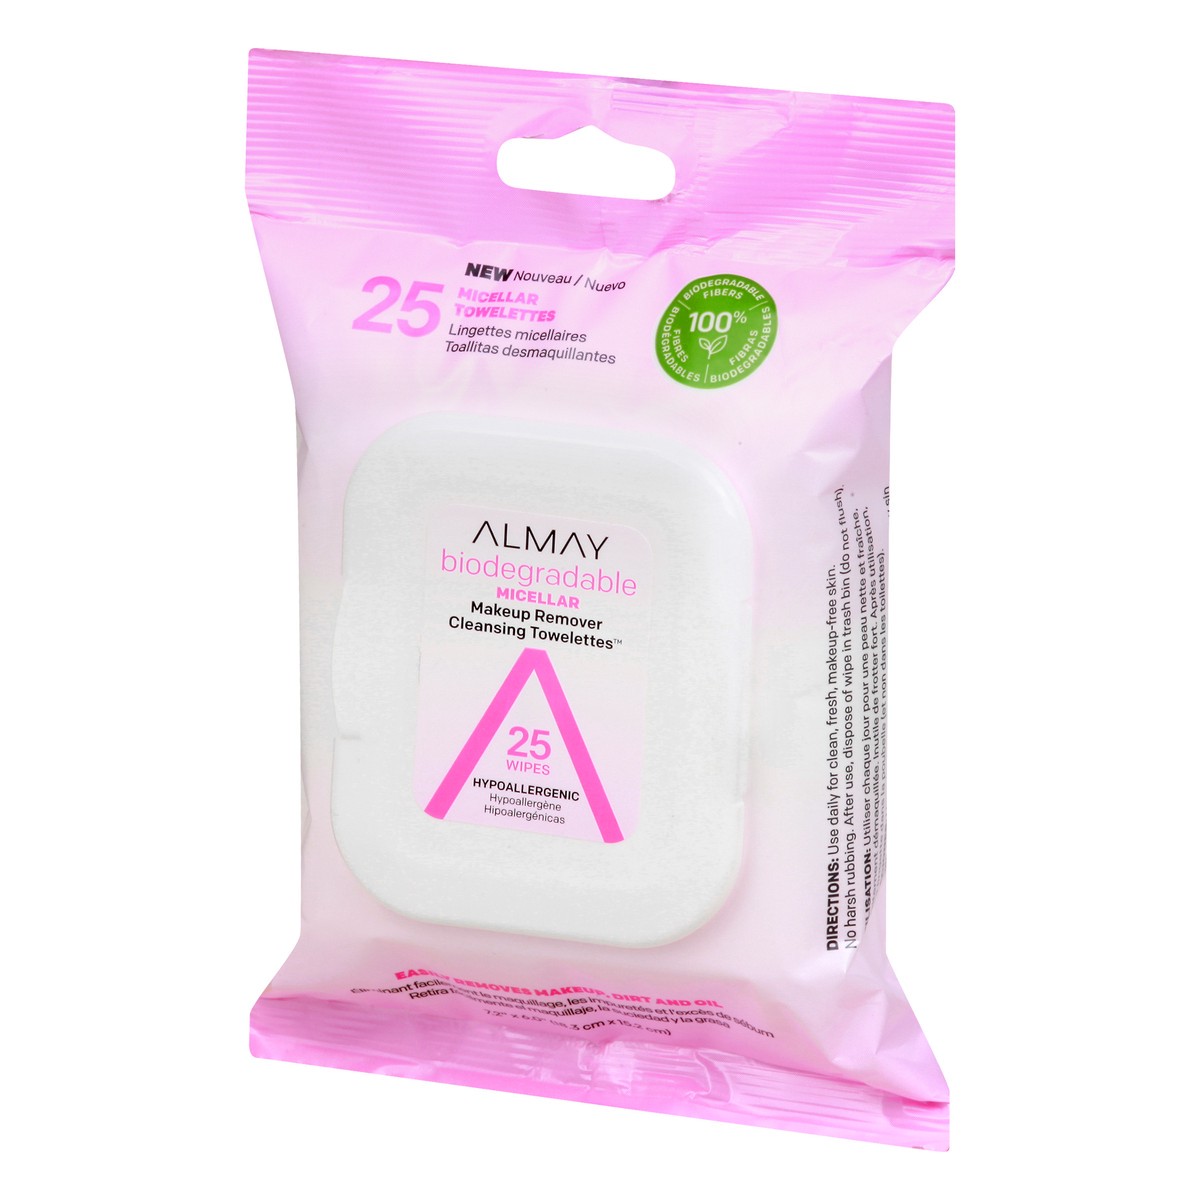 slide 3 of 9, Almay Biodegradable Micellar Makeup Remover Cleansing Towelettes, 25 ct